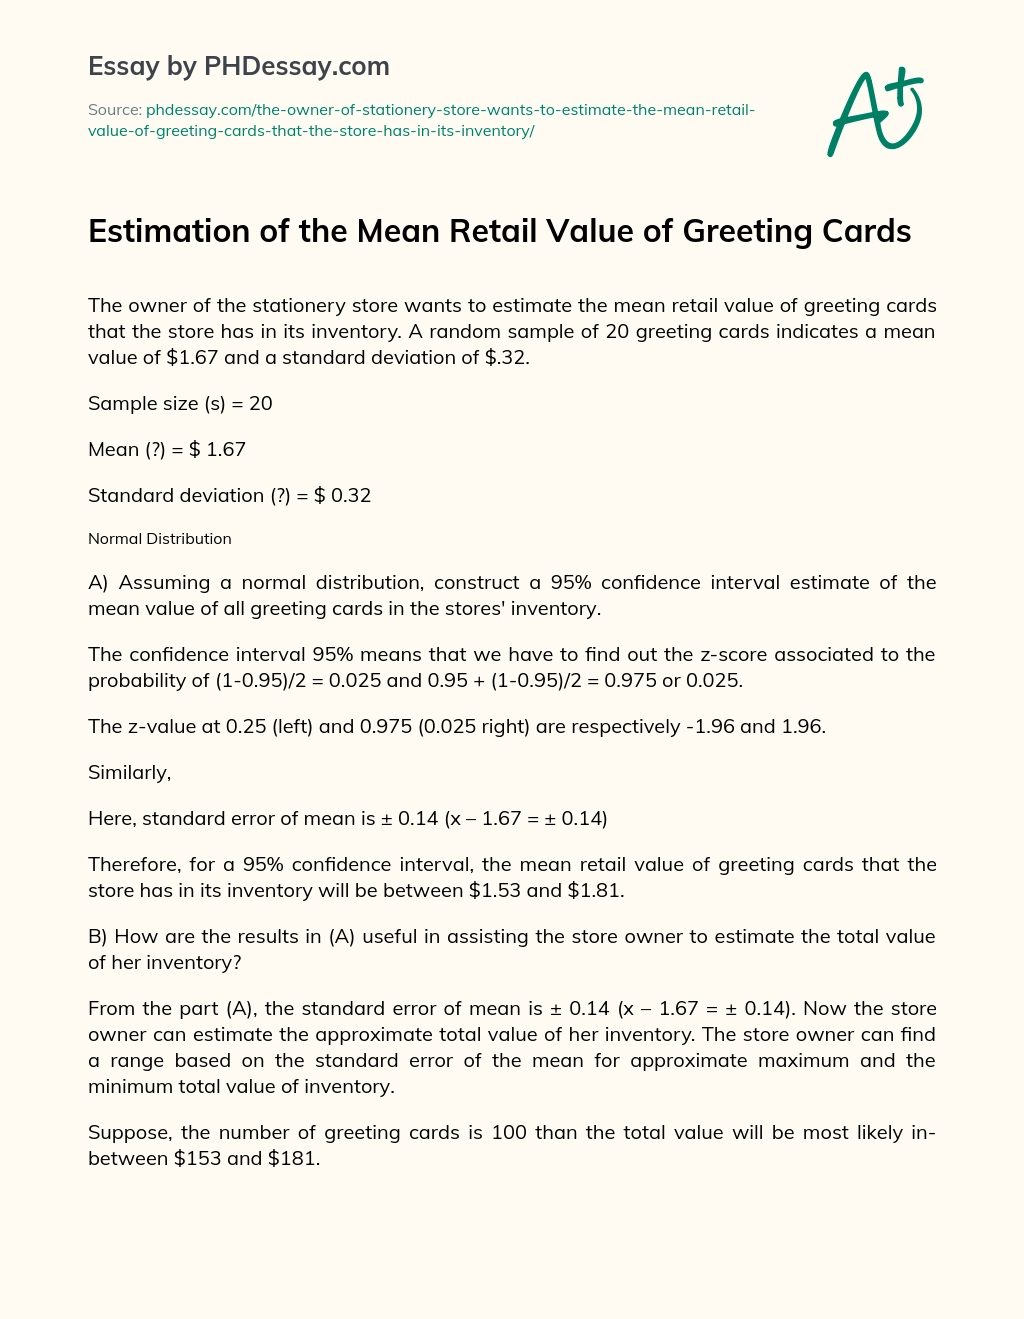 Estimation of the Mean Retail Value of Greeting Cards essay